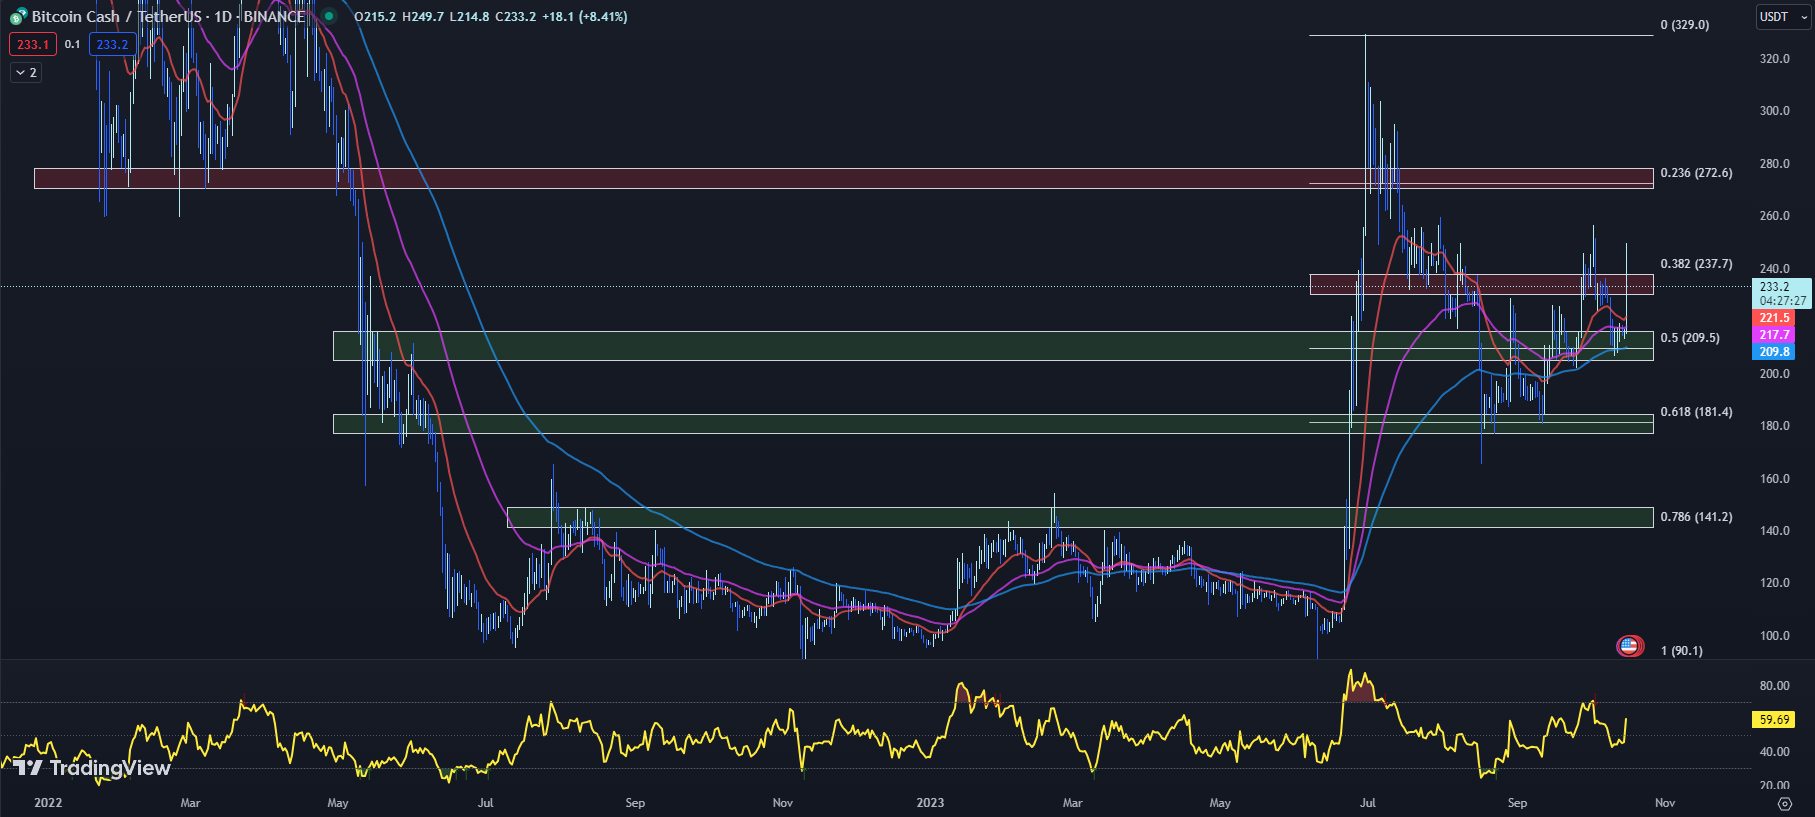 TradingView chart for the BCH tag 10-16-23